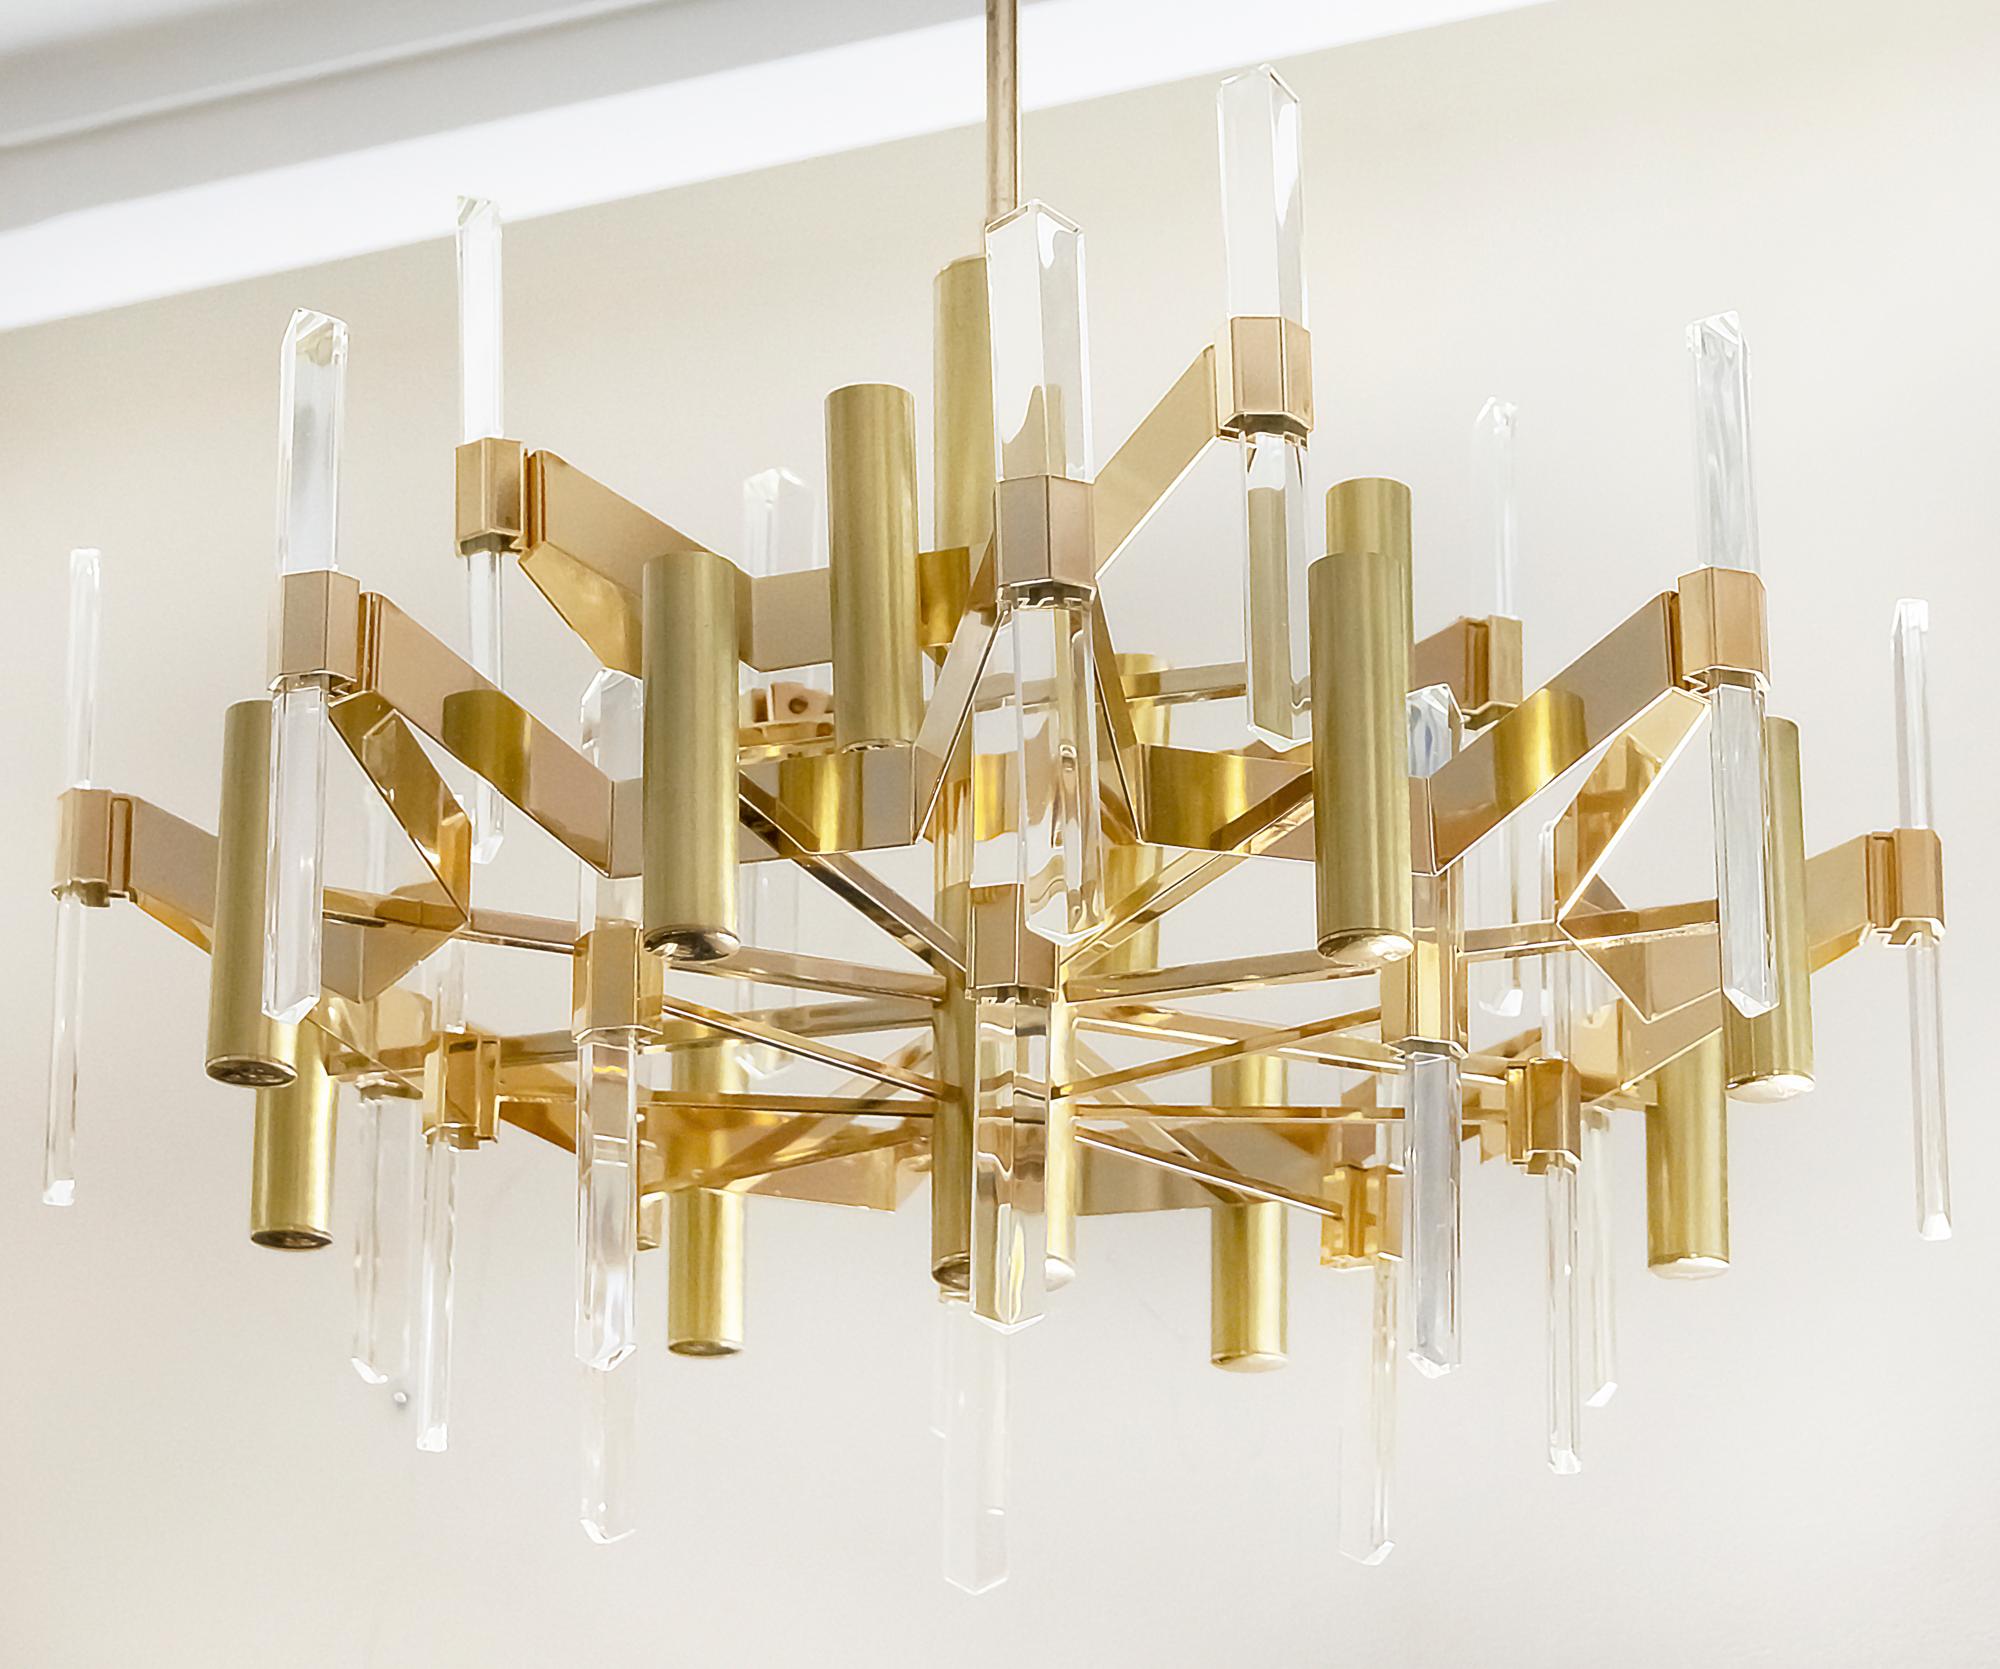 Italian mid-century Sciolari chandelier is made of gilt brass with clear glass details.
This chandelier includes 12 pieces E14 bulbs.

It is in a very good original vintage condition.

